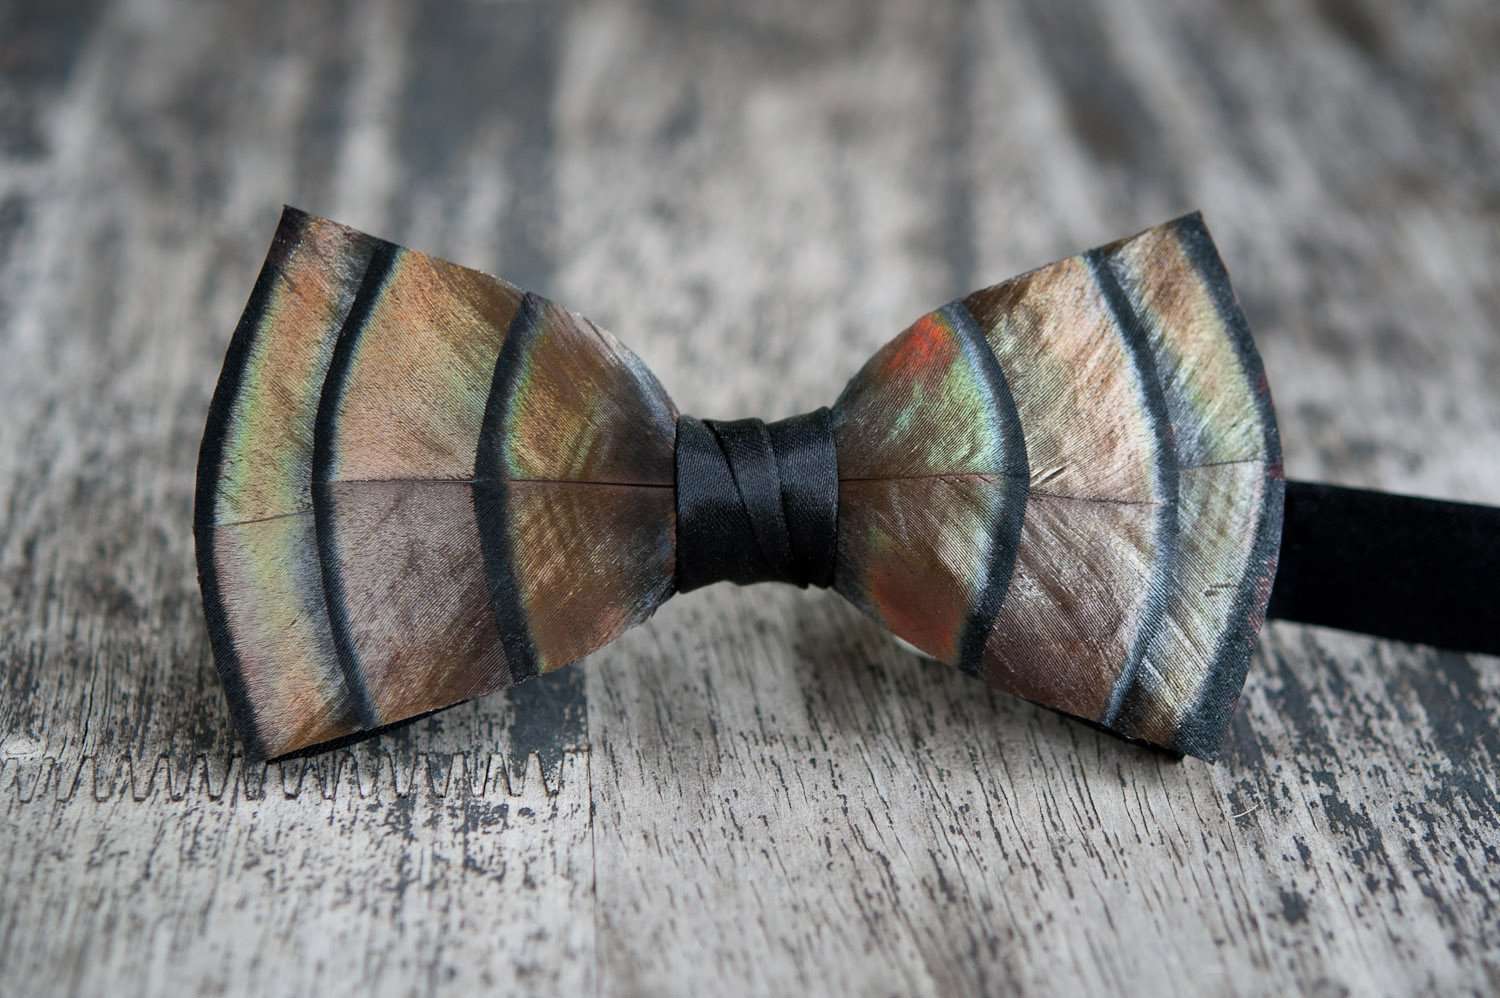 Original Feather Bow Tie in Peacock by Brackish Bow Ties - Country Club Prep